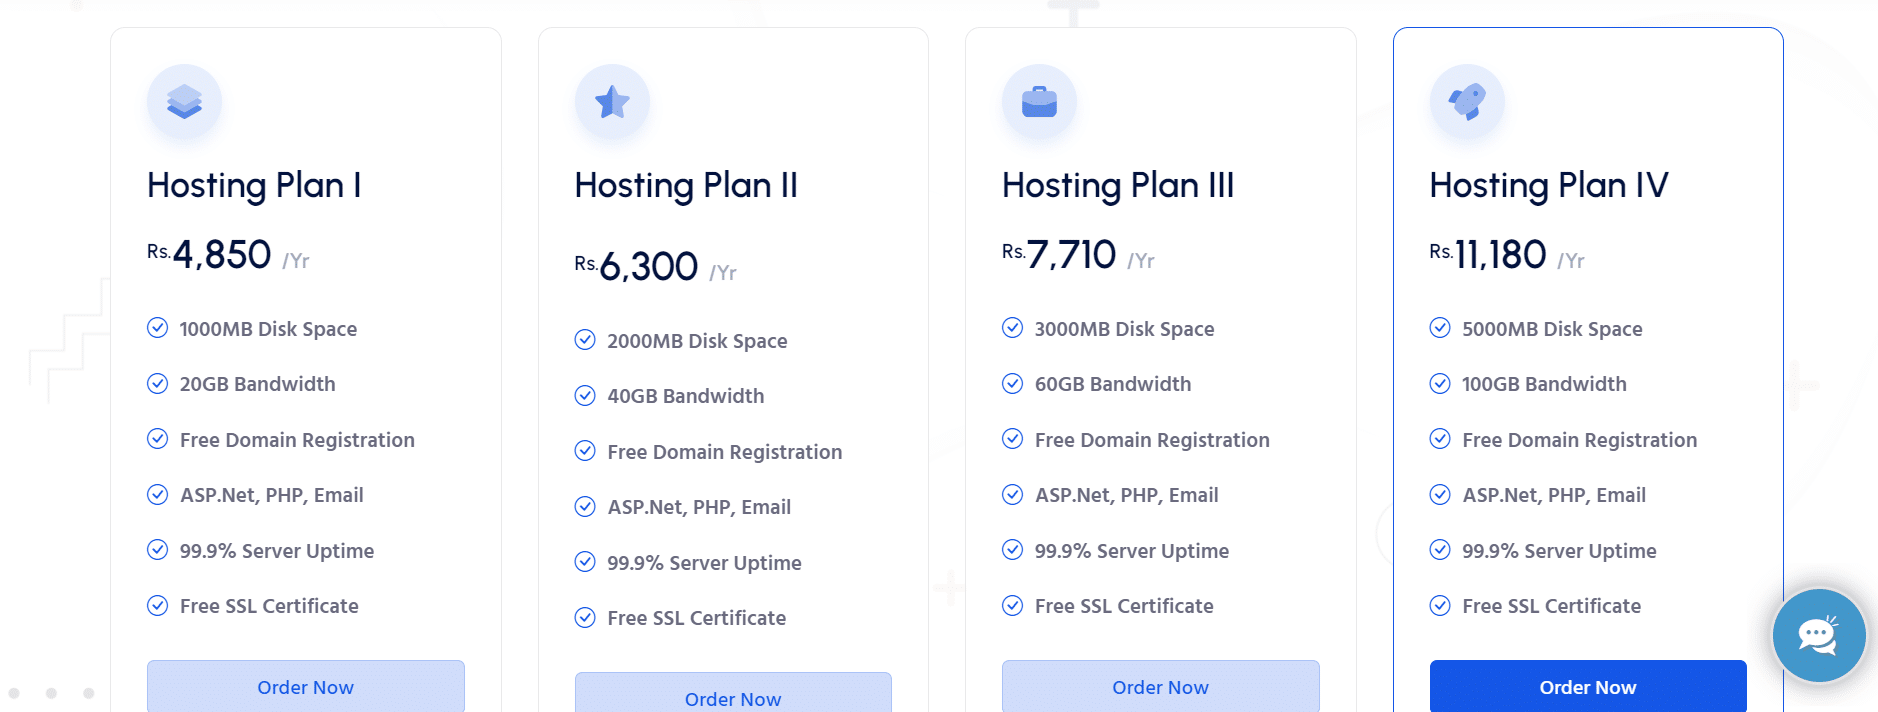 HosterPk hosting price and packages 